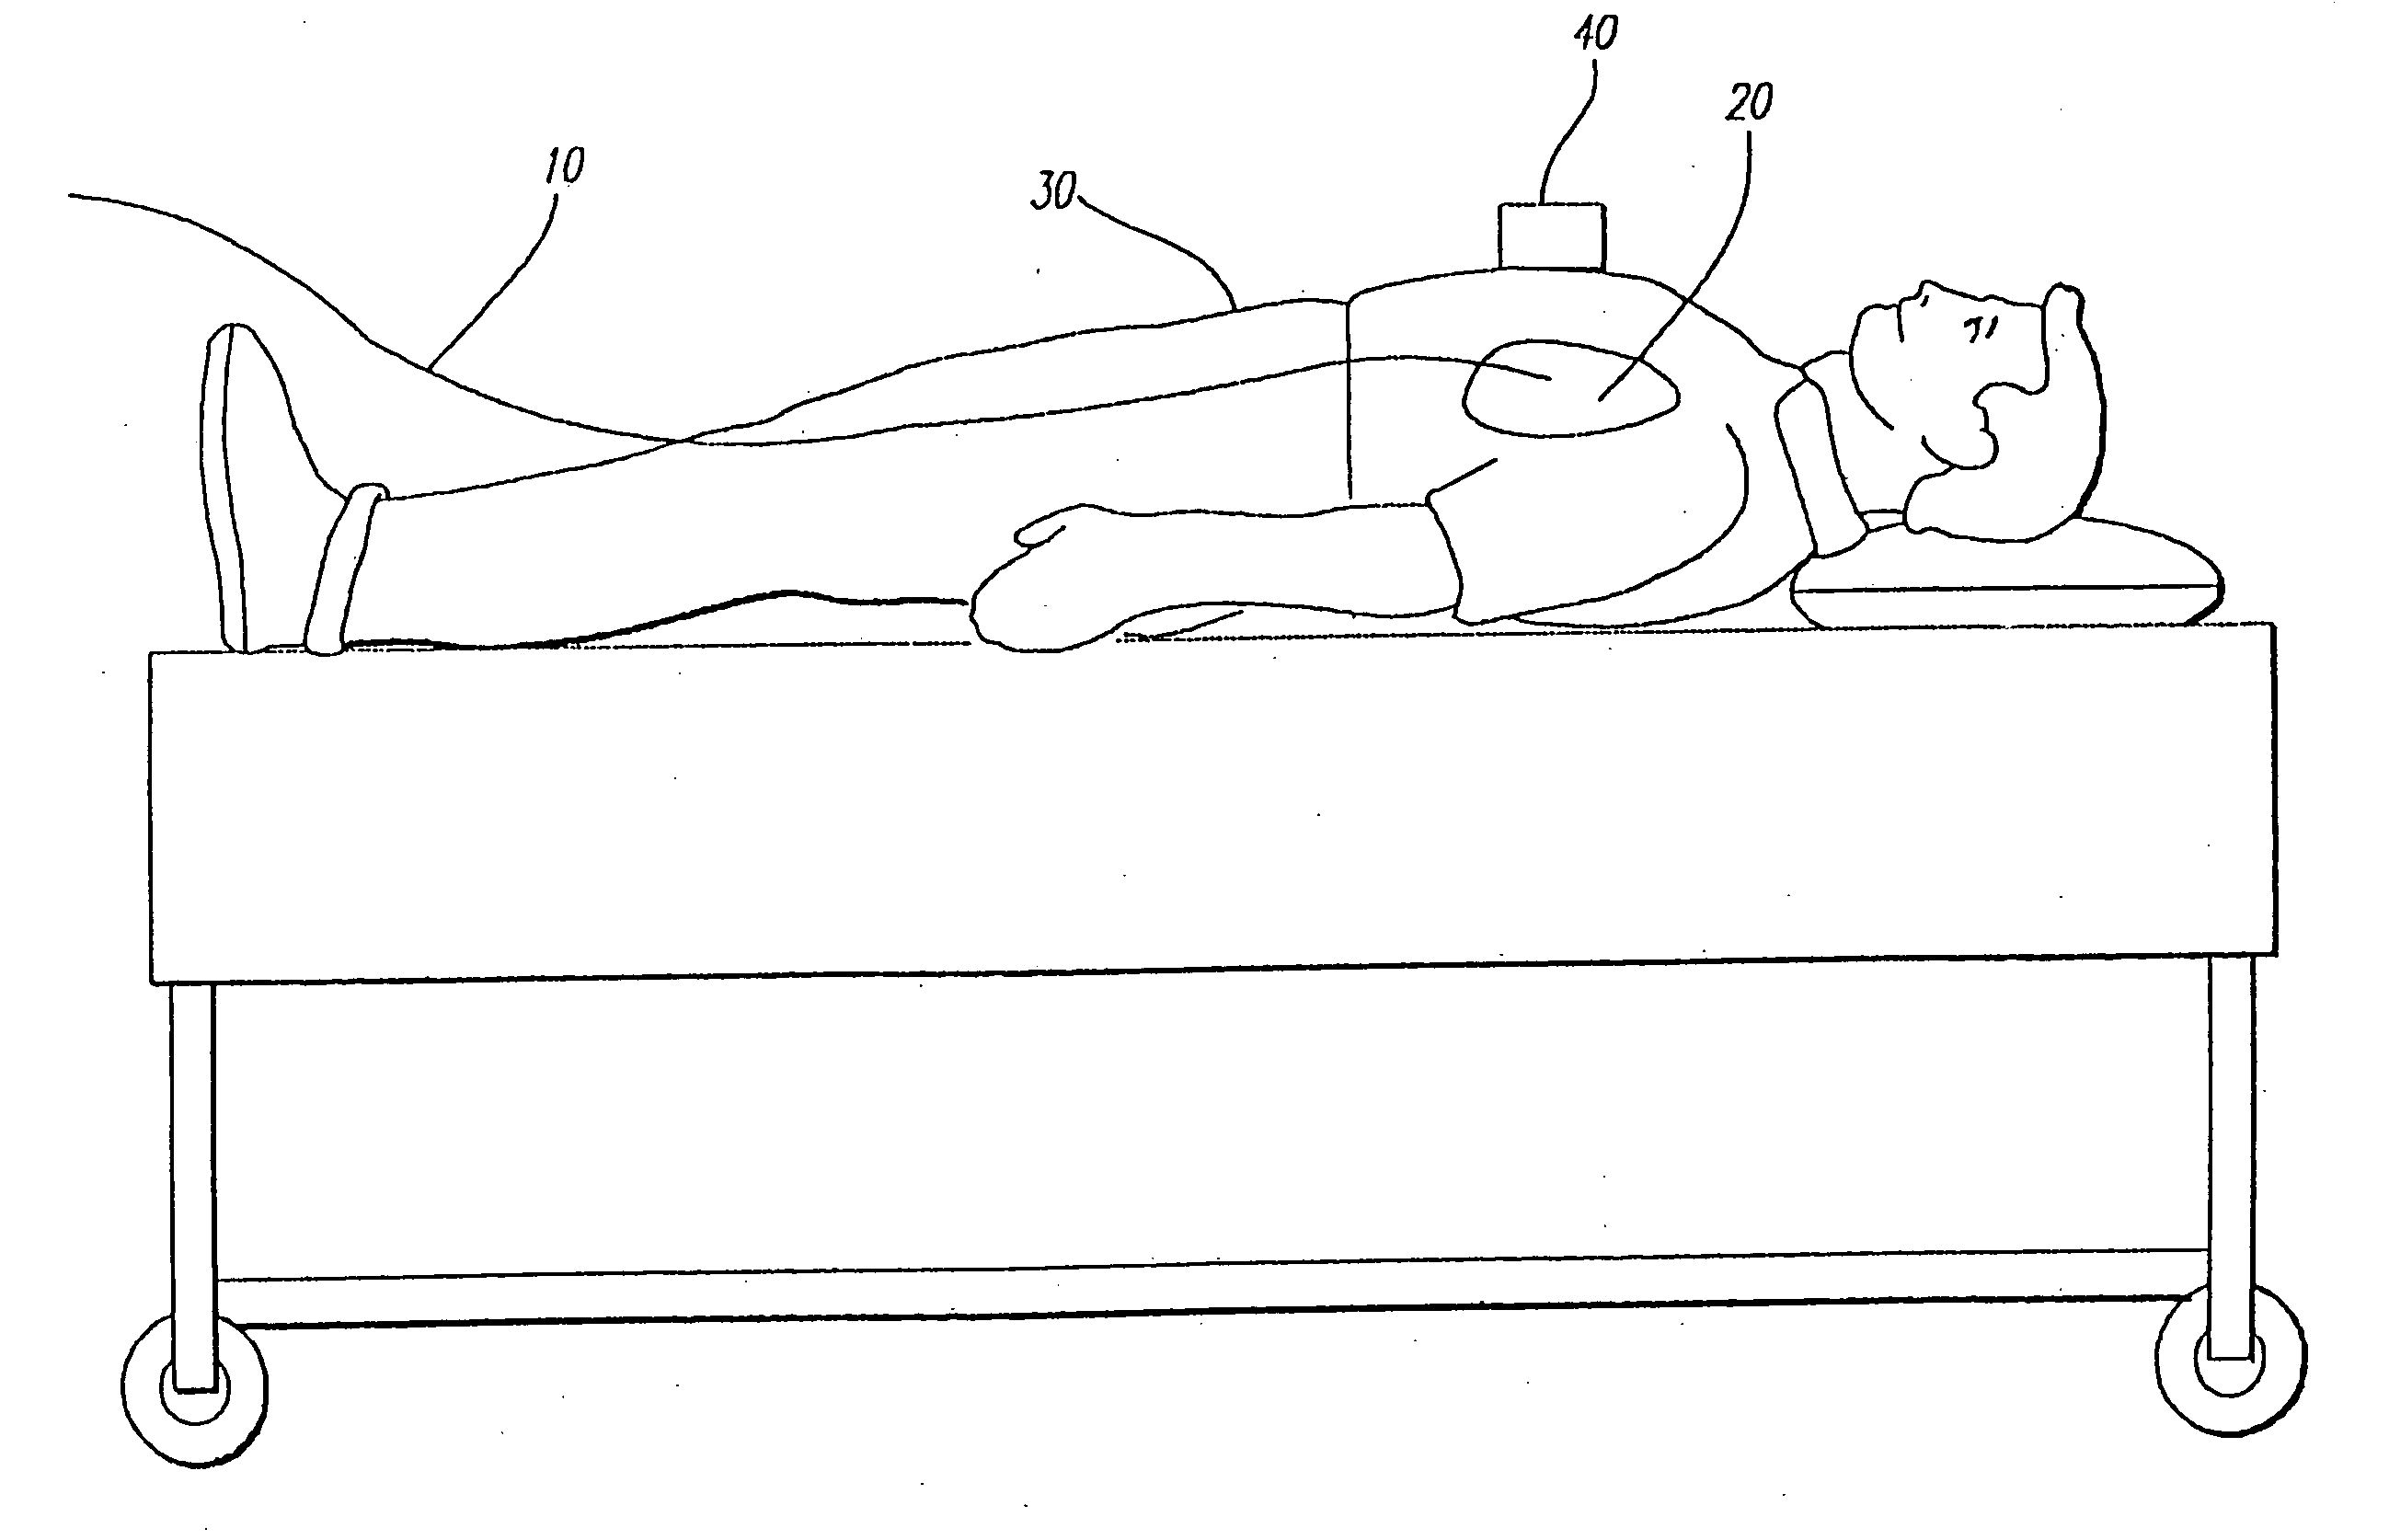 Apparatus and method for inducing vibrations in a living body